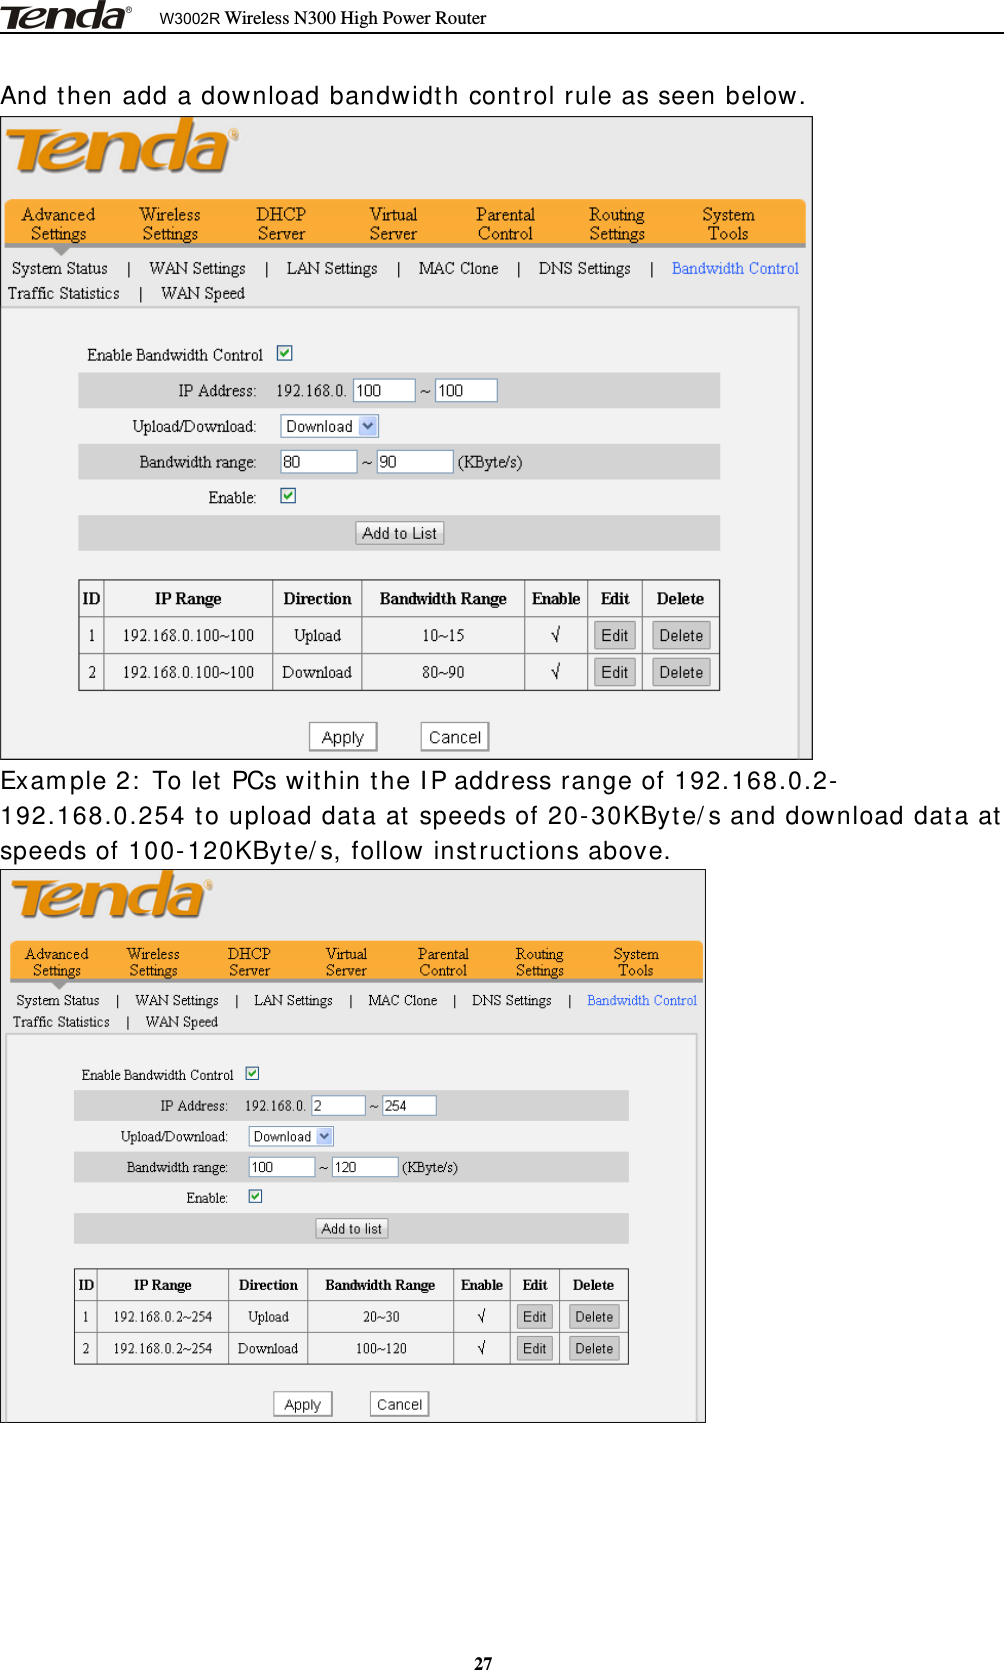 W3002R Wireless N300 High Power Router27And then add a download bandwidth control rule as seen below.Example 2: To let PCs within the IP address range of 192.168.0.2-192.168.0.254 to upload data at speeds of 20-30KByte/s and download data atspeeds of 100-120KByte/s, follow instructions above.